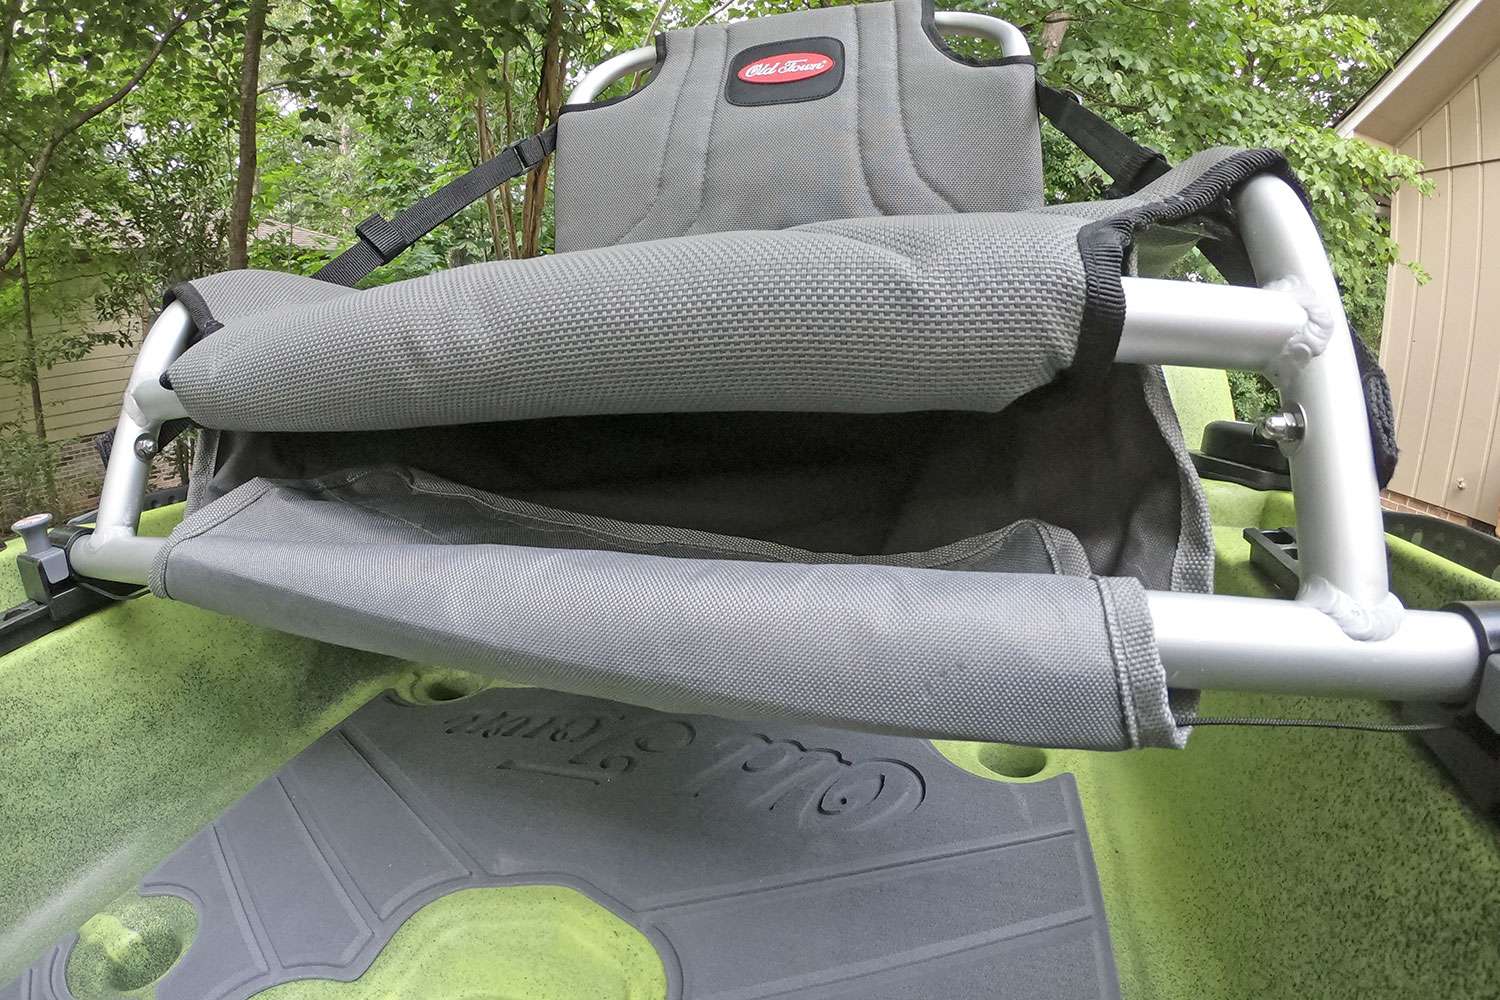 Beneath the seat is a convenient pocket that can handle a tray or whatever plastics the bass are eating. More storage is a good thing.